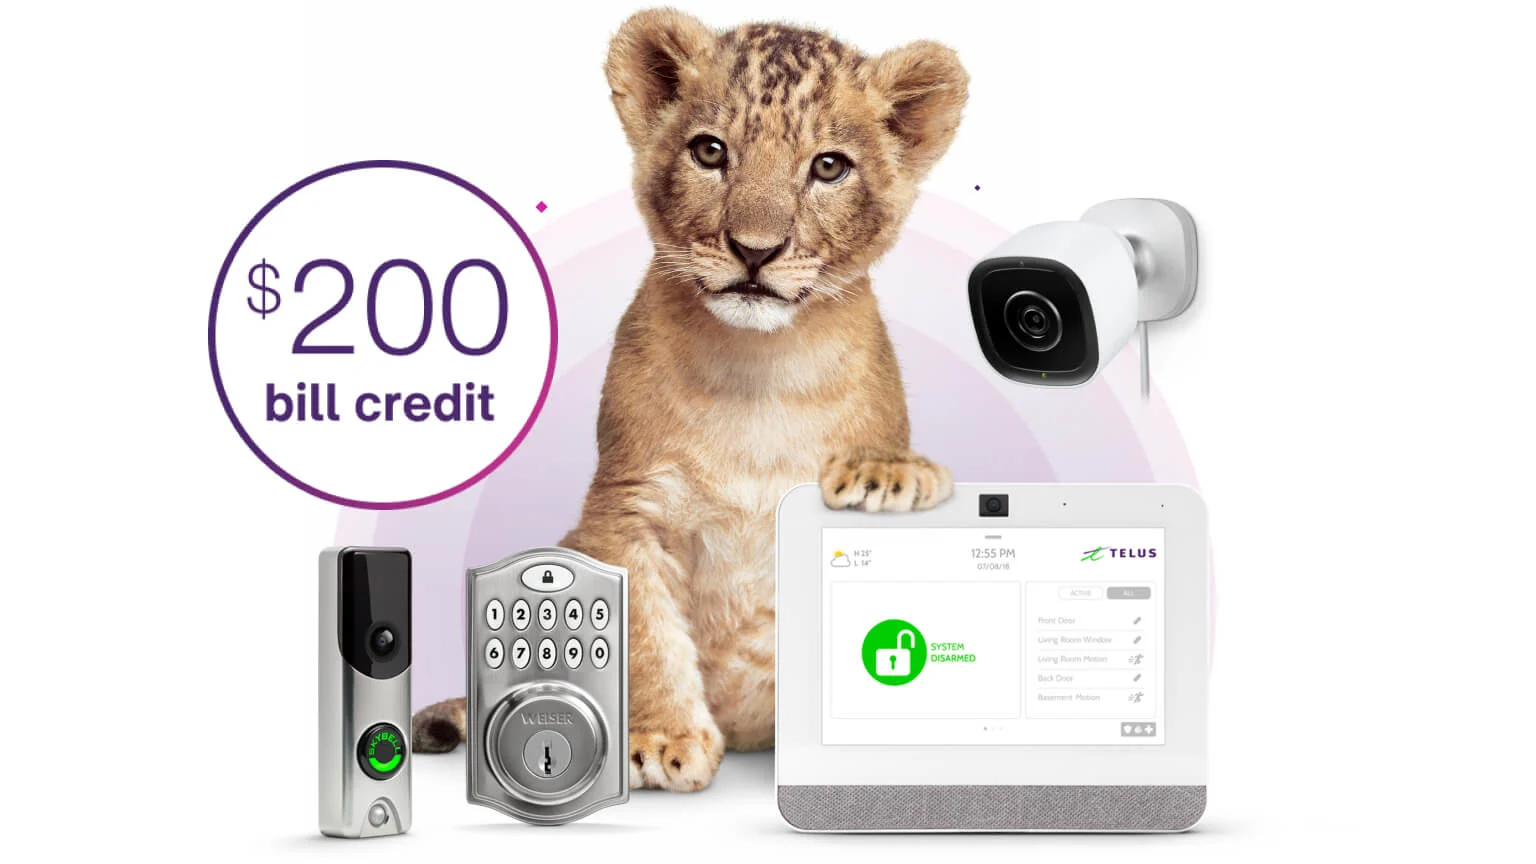 Lion cub surrounded by home security equipment, banner reading $200 bill credit